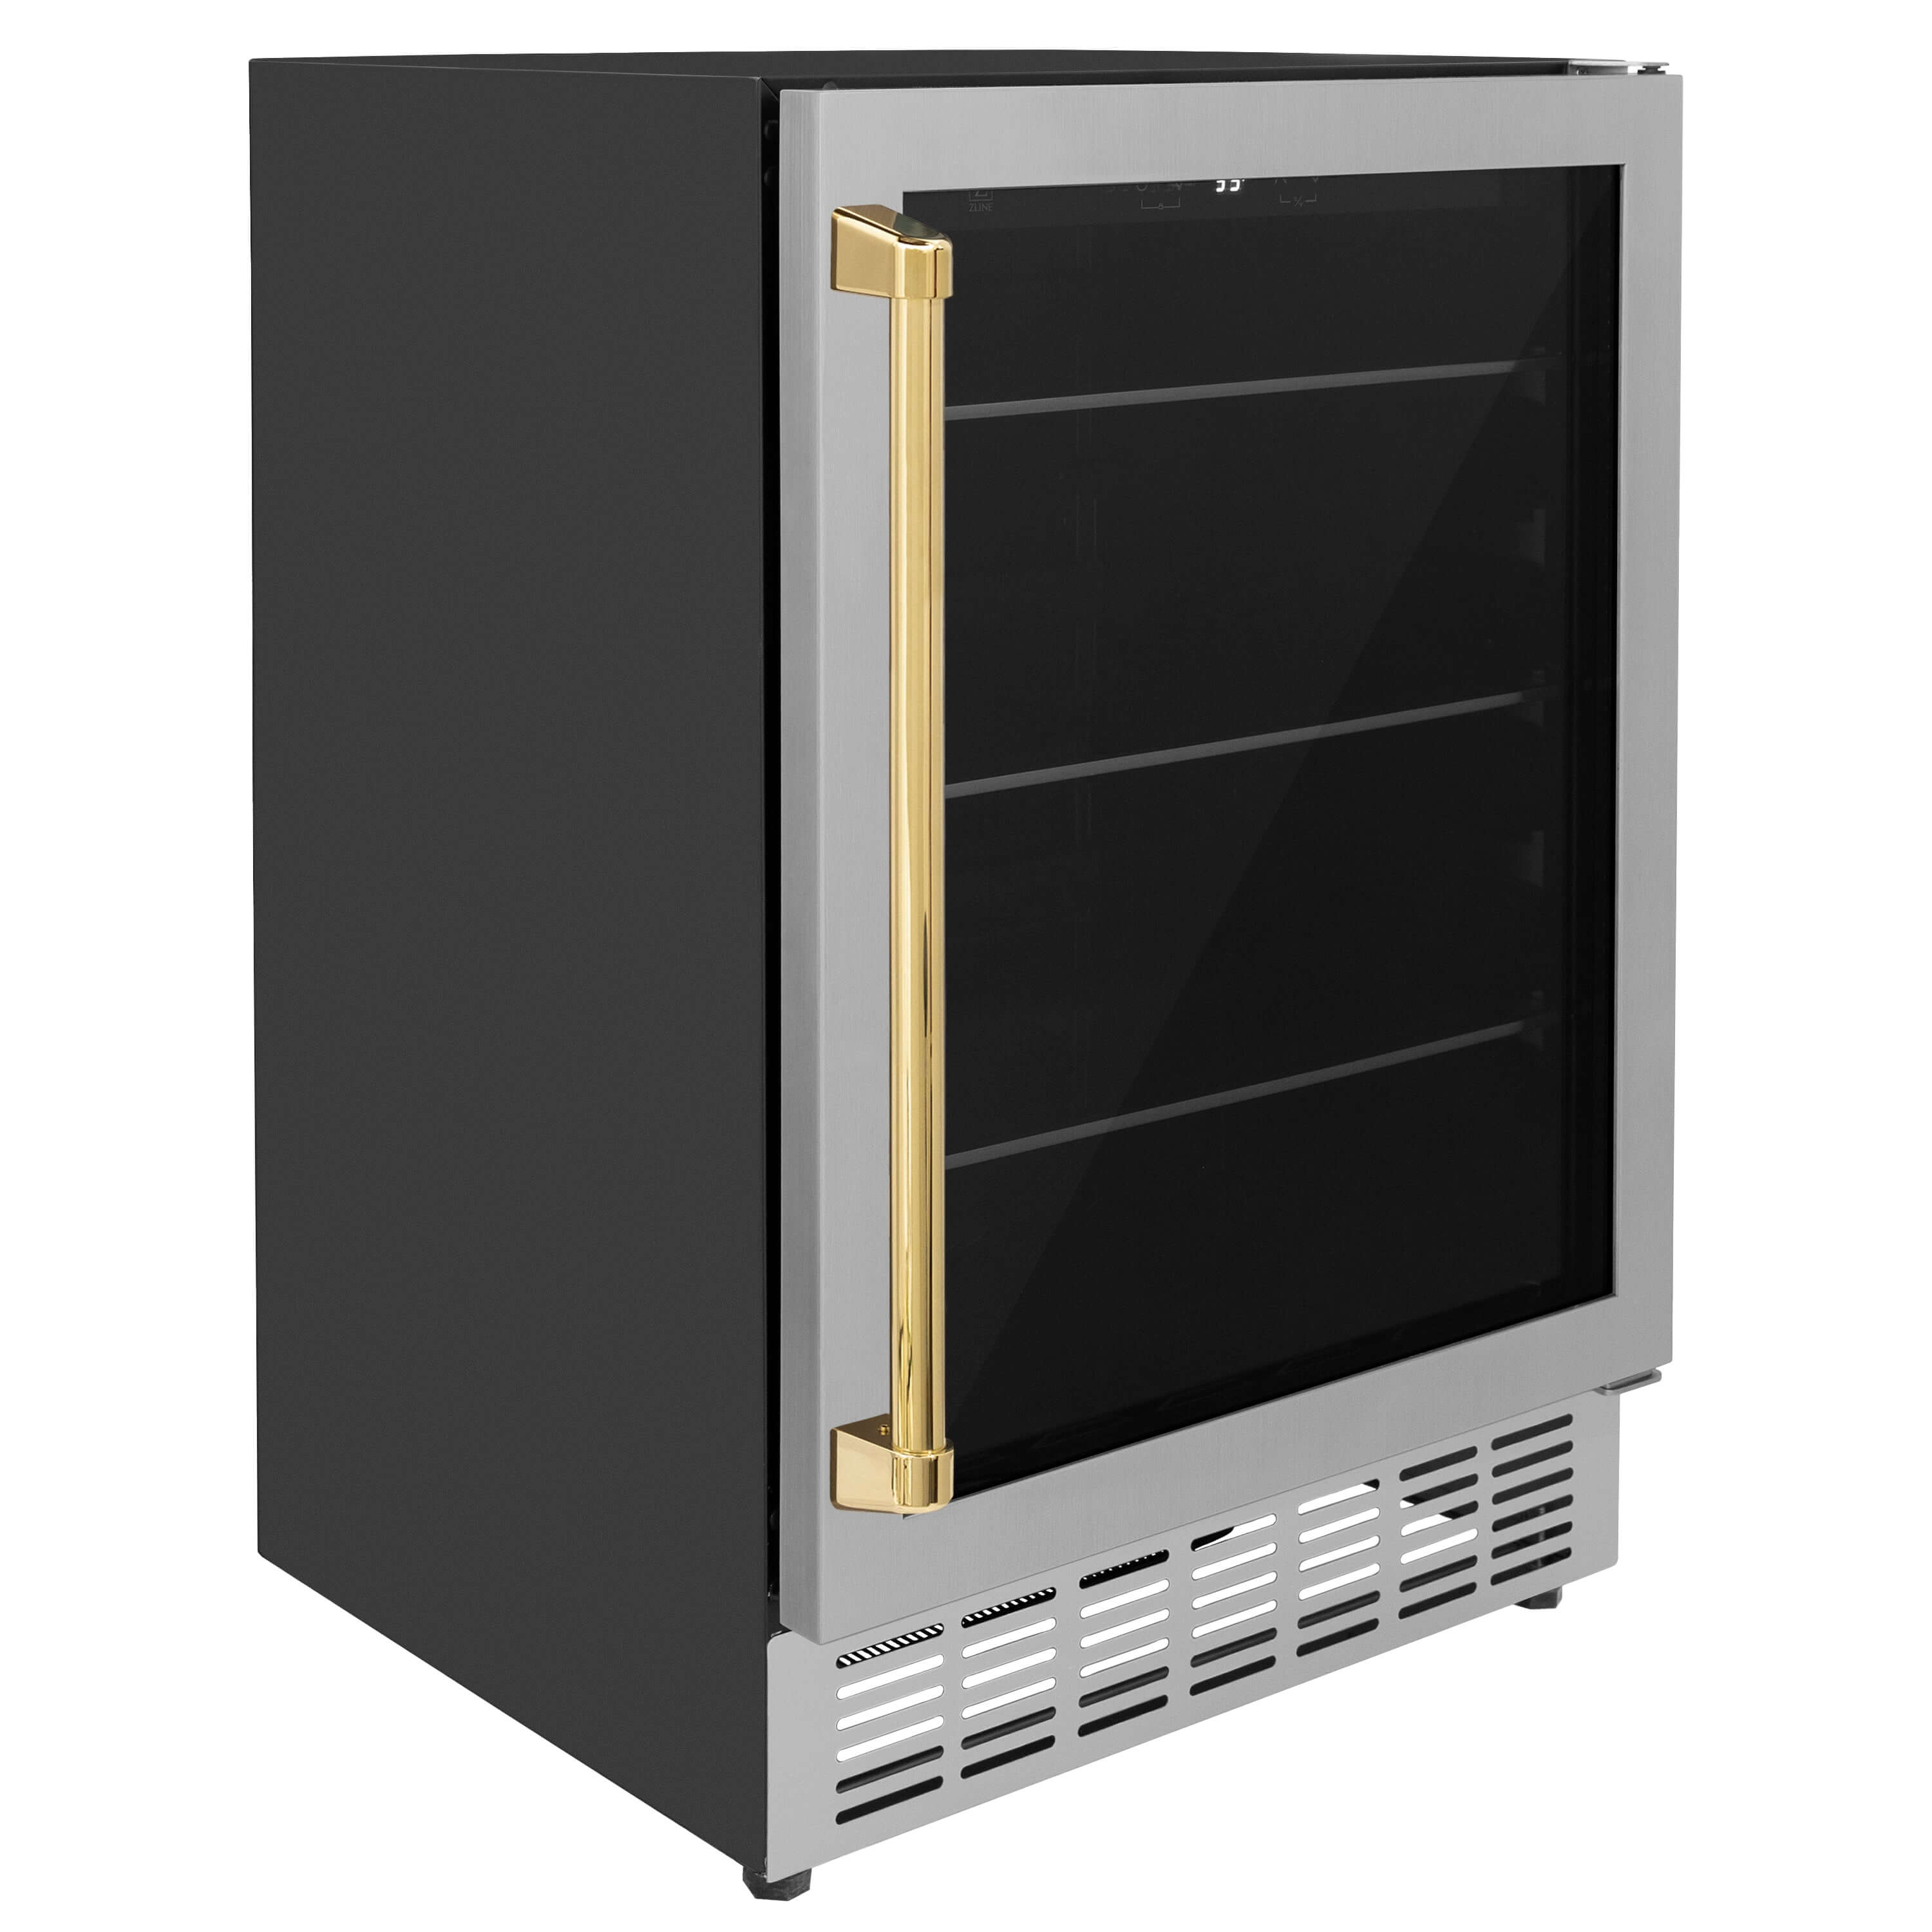 ZLINE Autograph Edition 24 in. Monument 154 Can Beverage Fridge in Stainless Steel with Polished Gold Accents (RBVZ-US-24-G) side, closed.